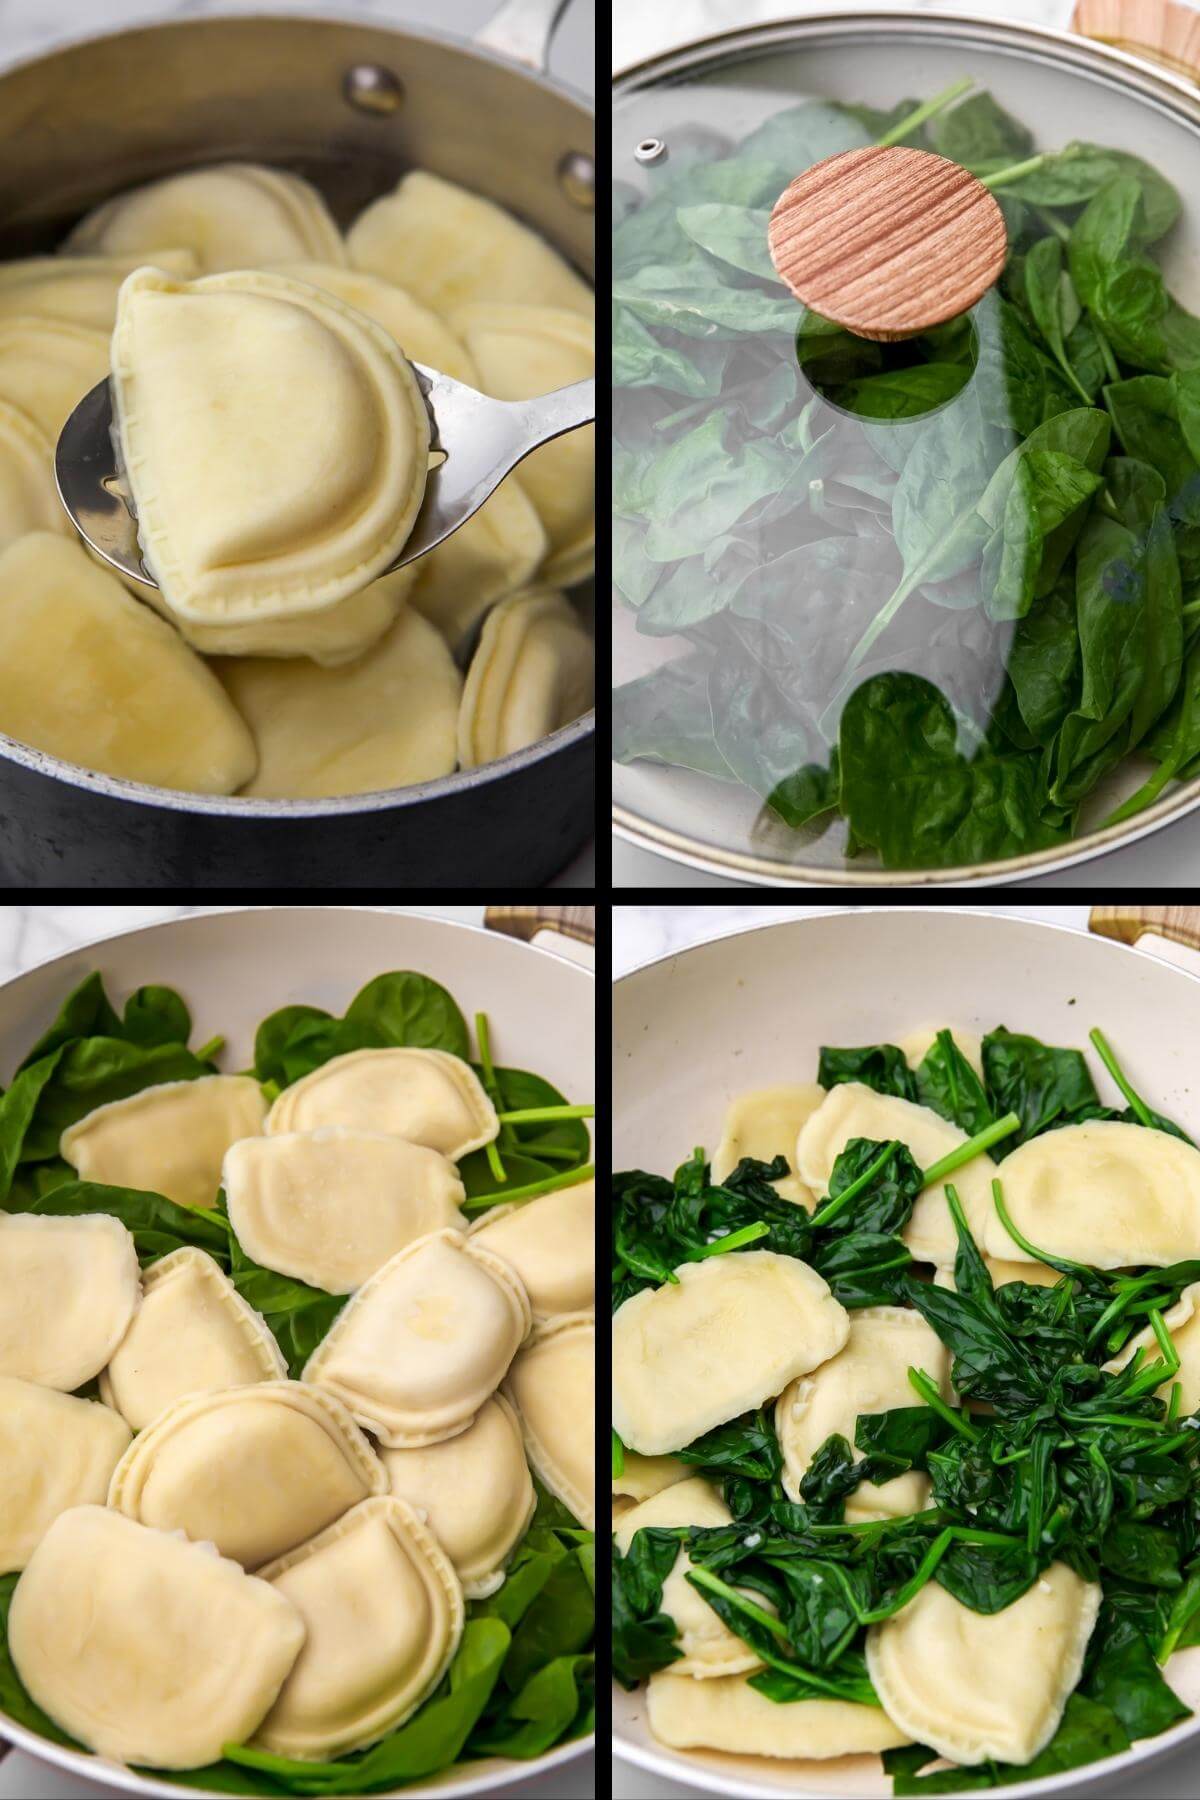 A collage of 4 images showing the process steps of making vegan perogies and frying them in garlic butter and spinach.